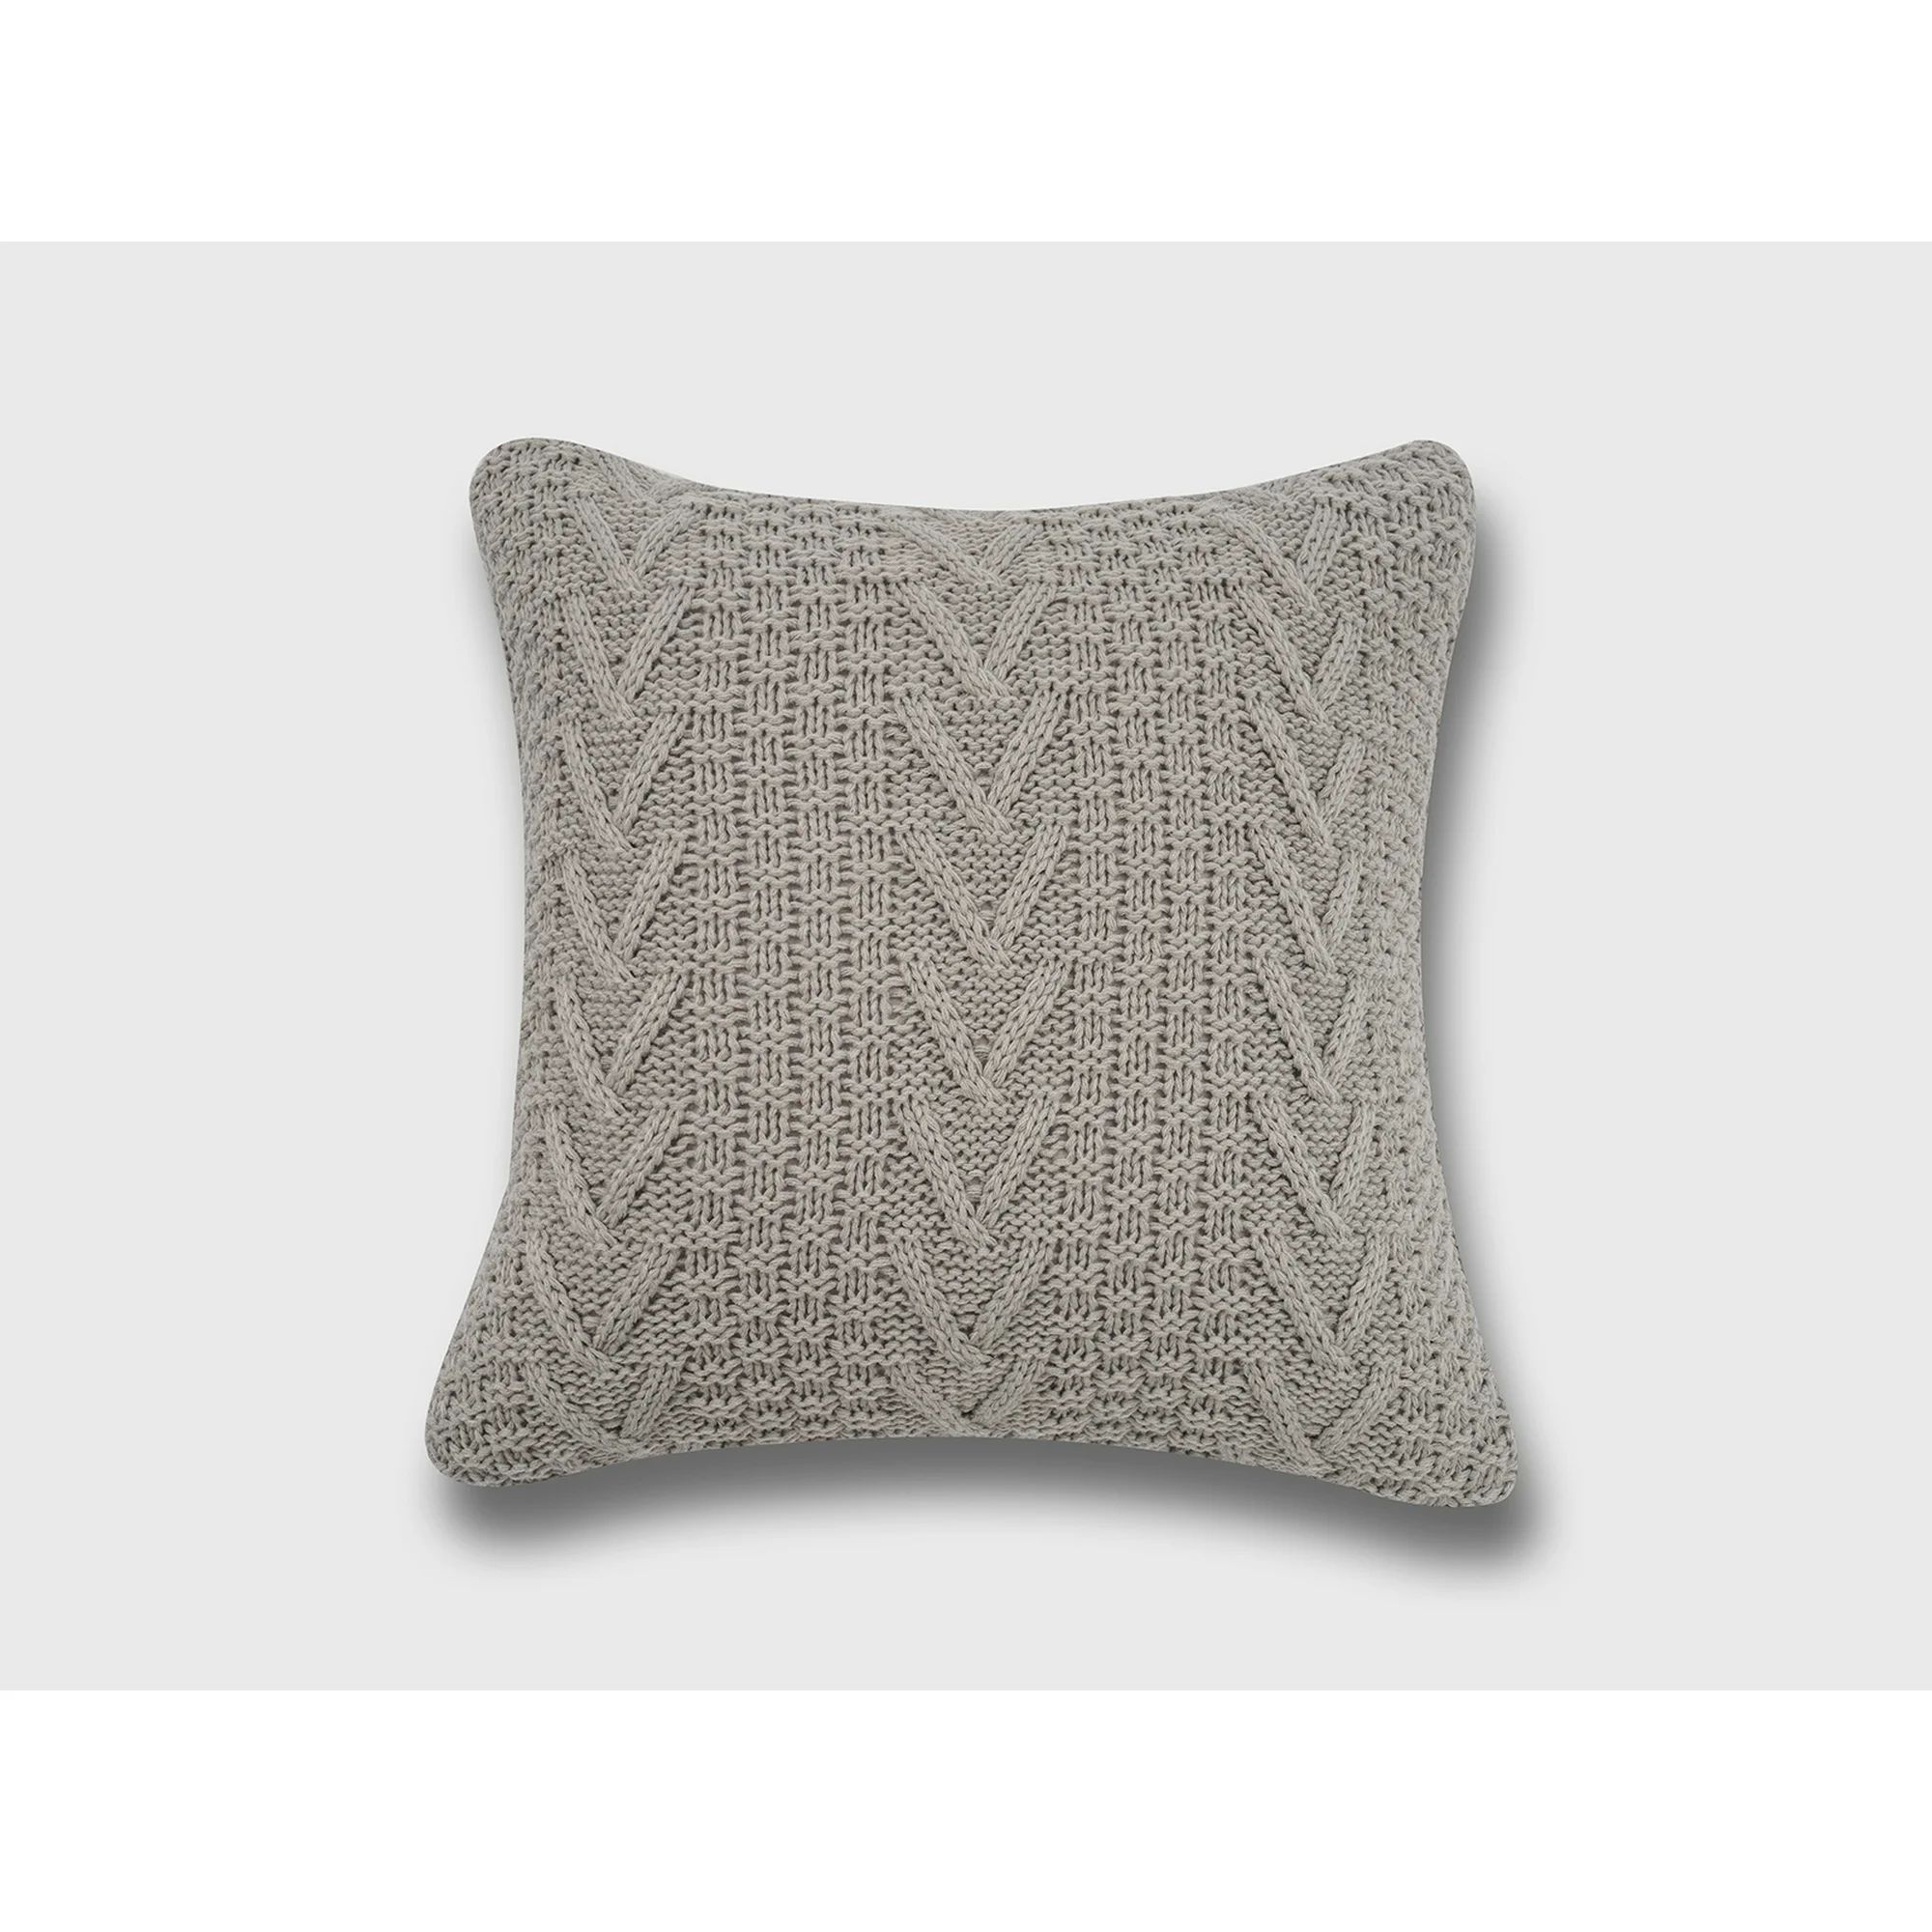 Evergrace Ratree Cable Knit Sweater Knit Assent Pillow 20"x20",Lt.Gray,1 Pack | Walmart (US)